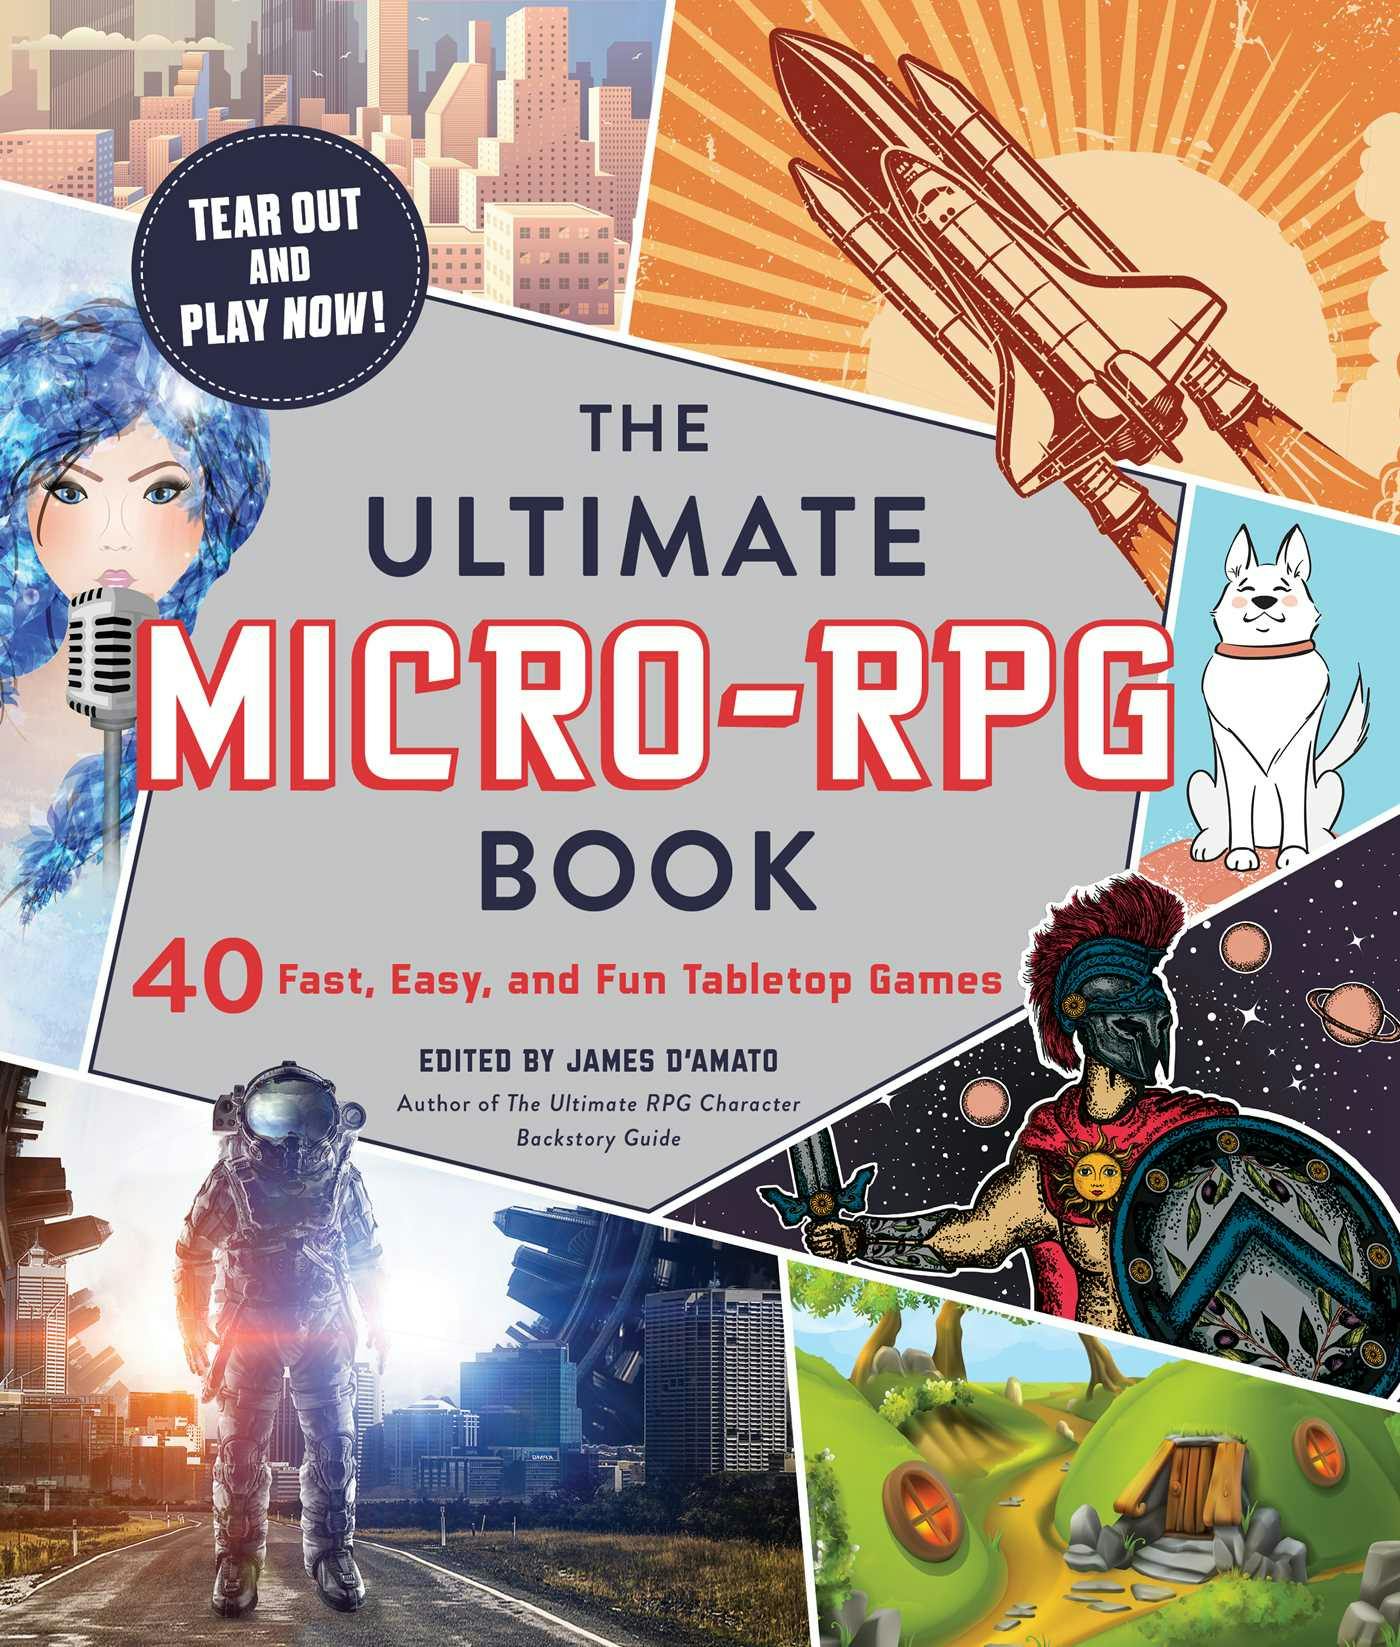 The Ultimate Micro-RPG Book: 40 Fast, Easy, and Fun Tabletop Games - undefined